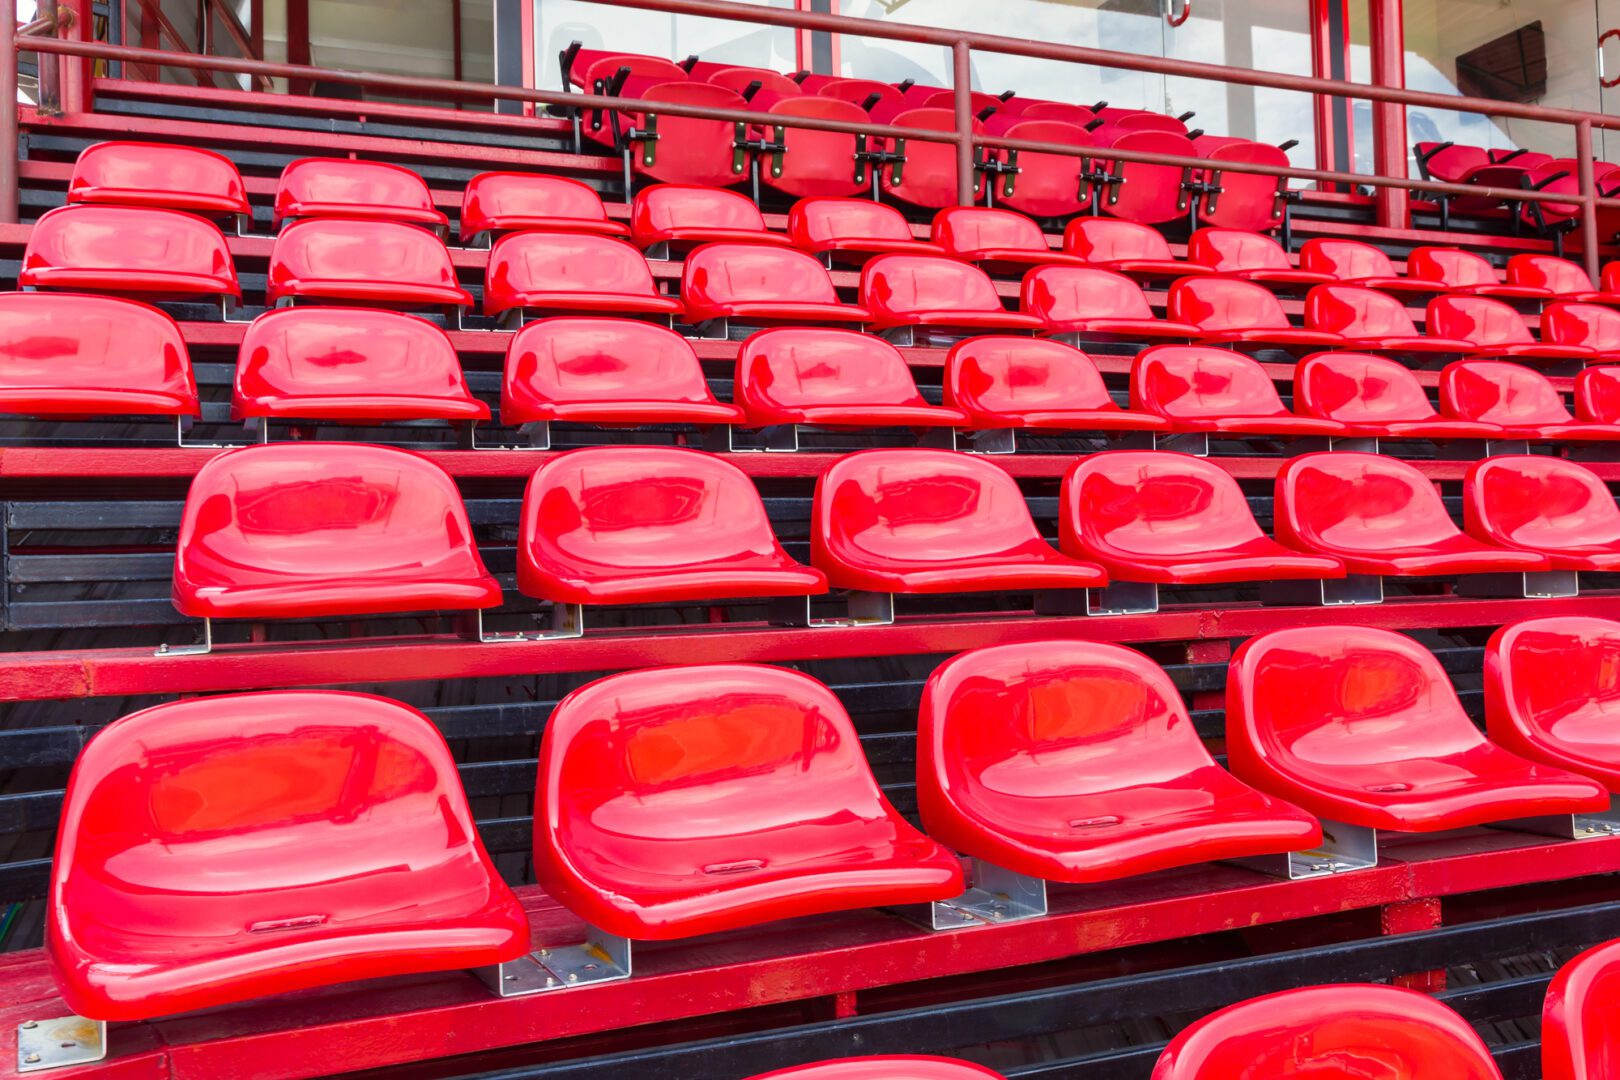 A stadium with red seats and black stands.